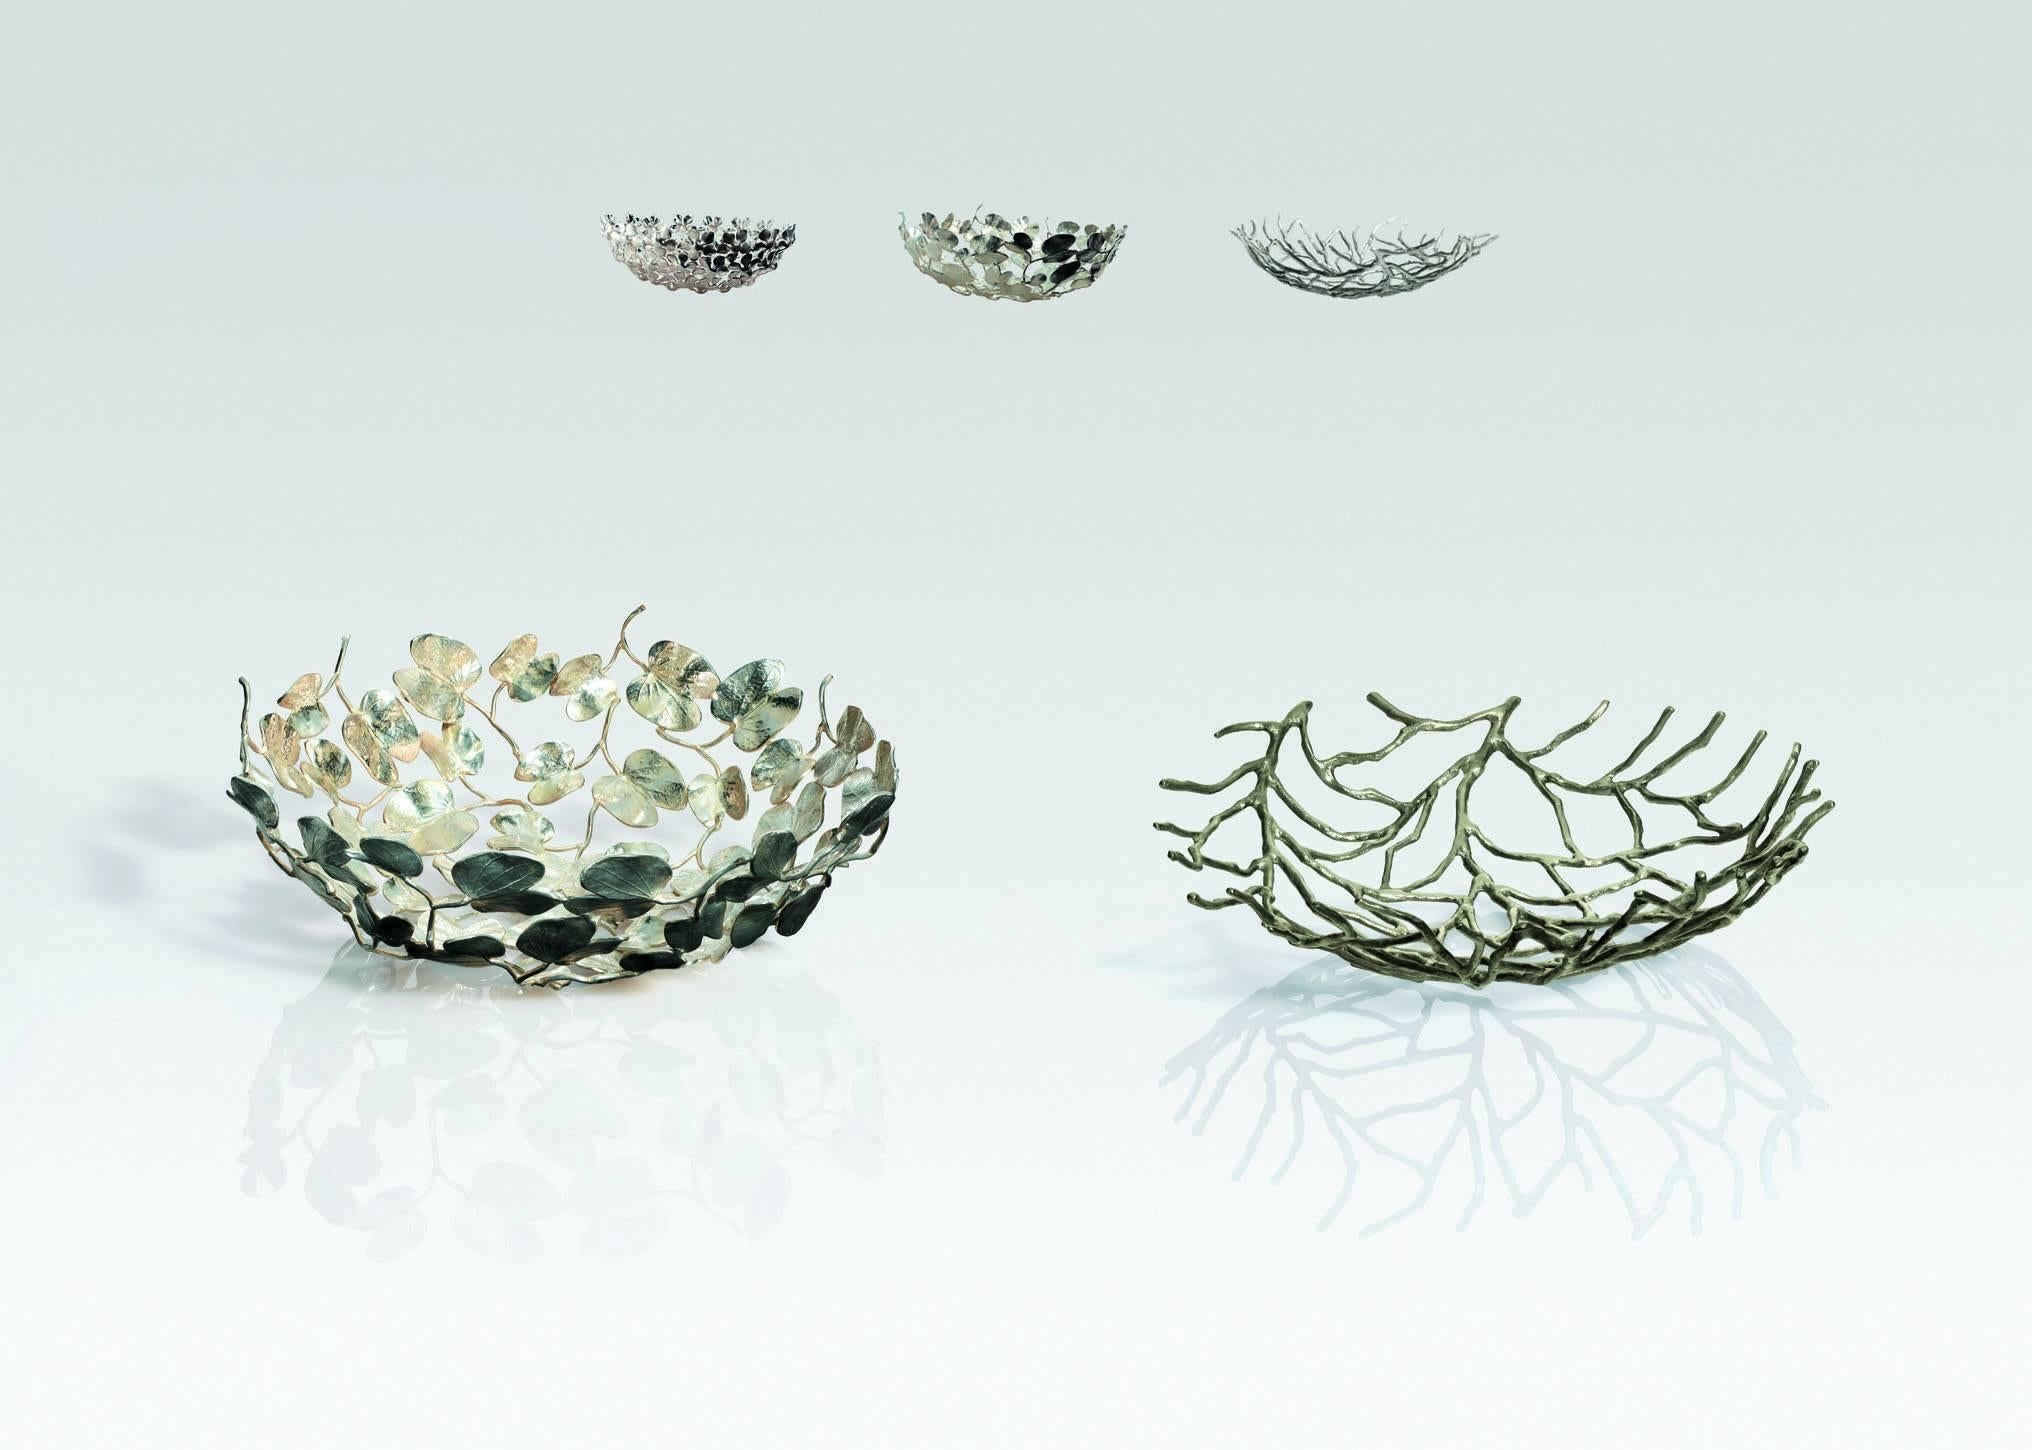 An arrangement of flowers or leaves tied together with a collection of small branches. These are the precious, bowl-shaped, centrepieces created by Mann Singh in silver plated brass.

Mann Singh comes from far away, from the land of the Sikhs in